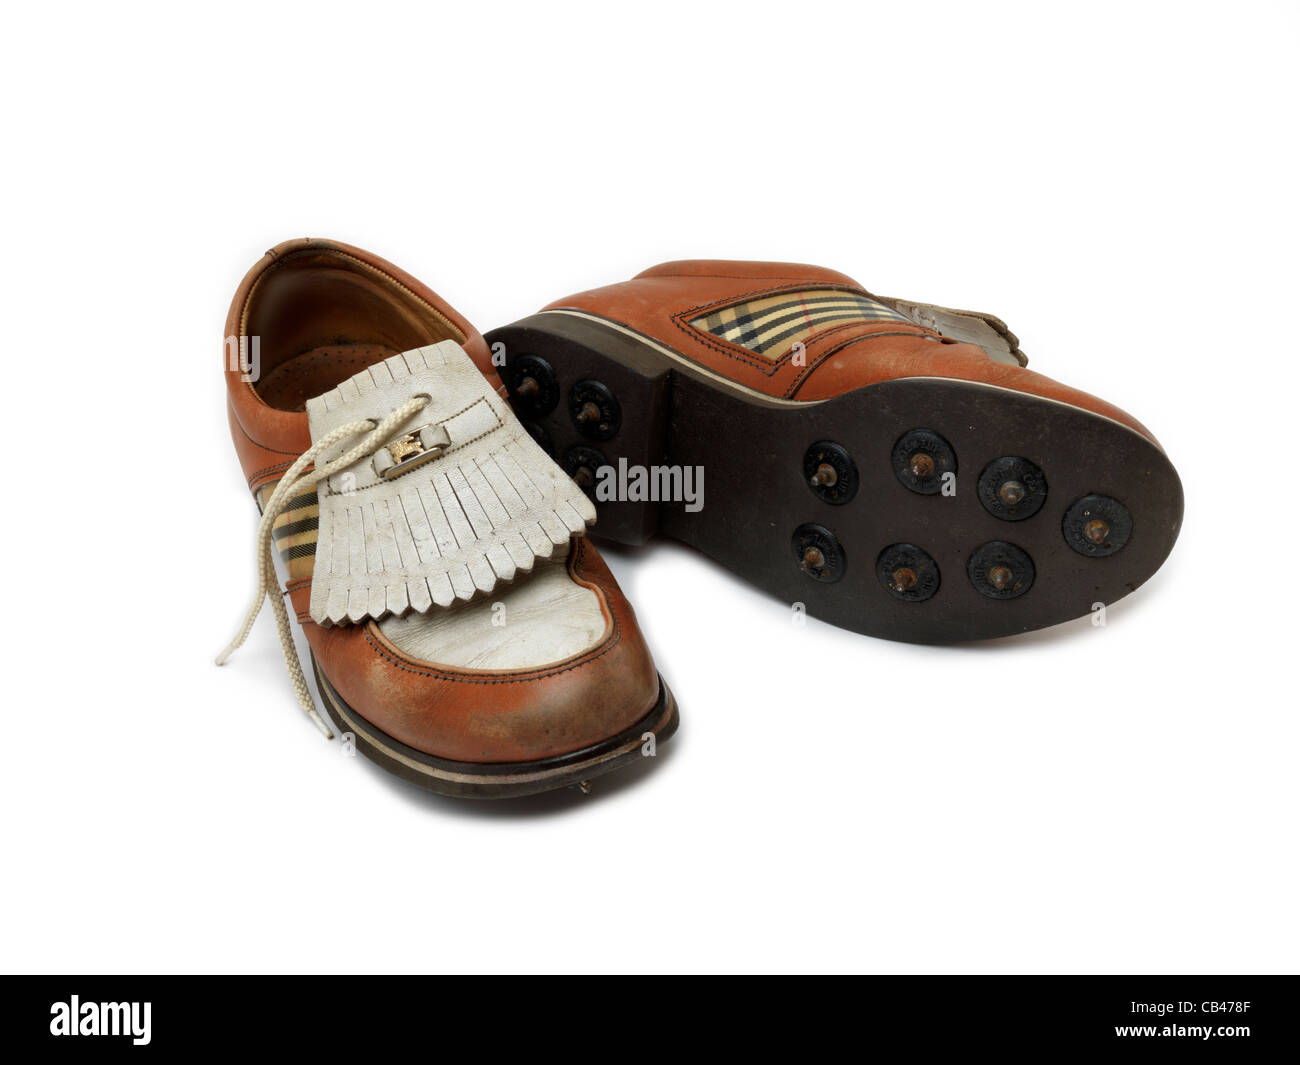 burberry golf shoes